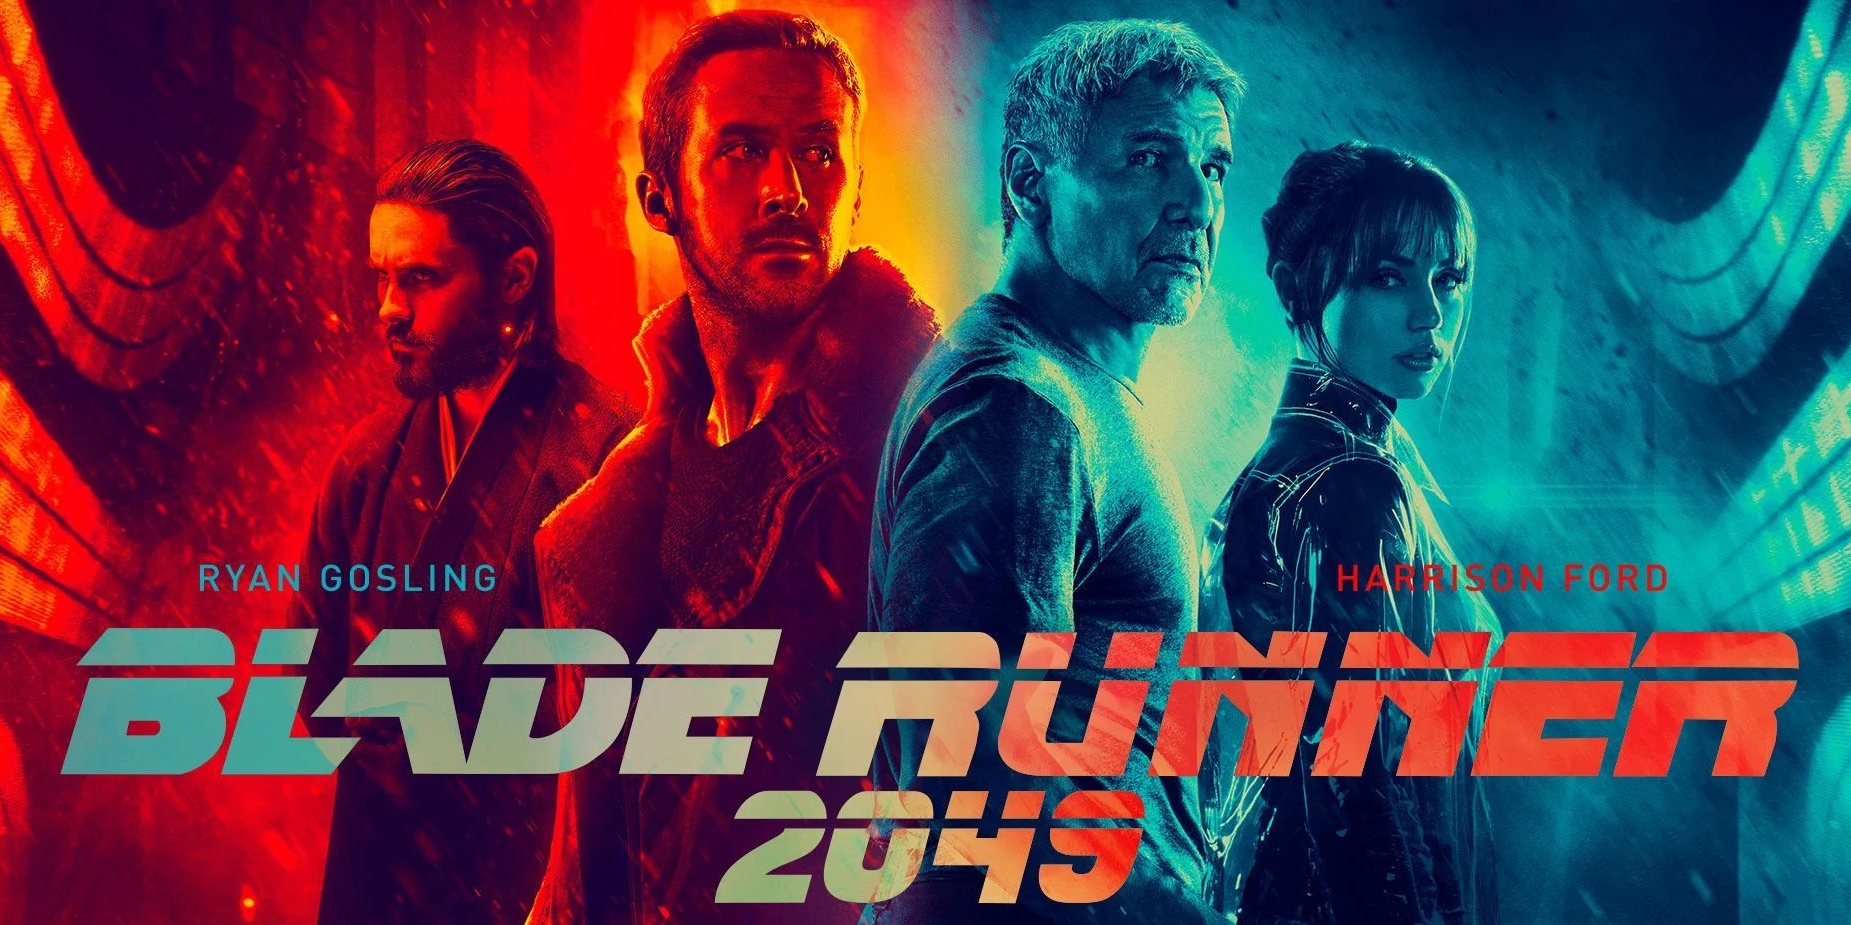 Blade Runner 2099 - The Amazon series has been officially created.  Ridley Scott on the team